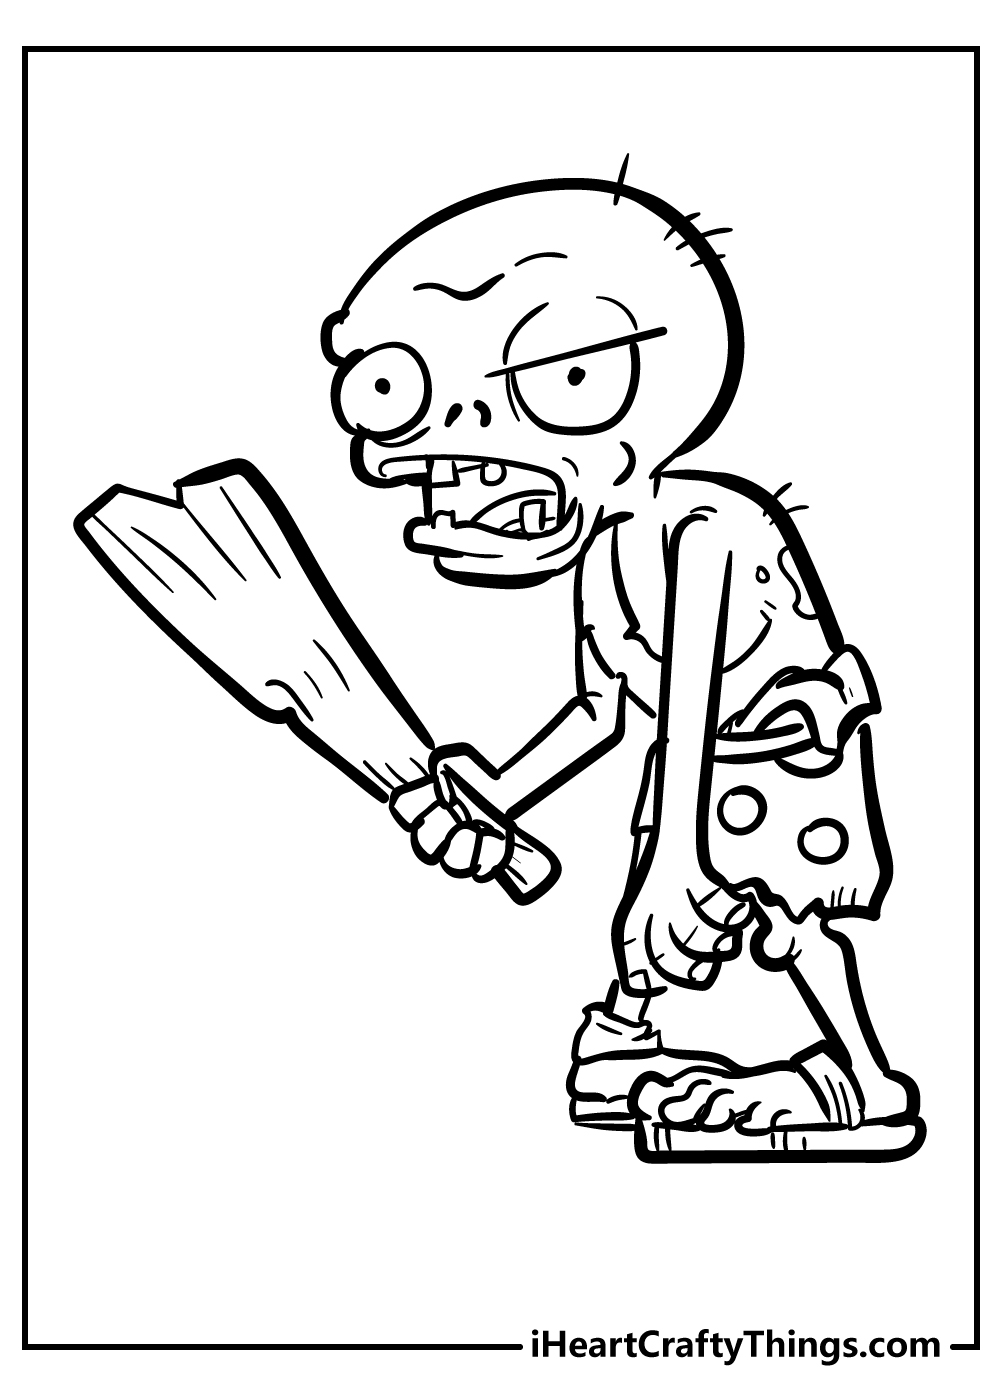 Plants Vs. Zombies Coloring Pages for kids free download